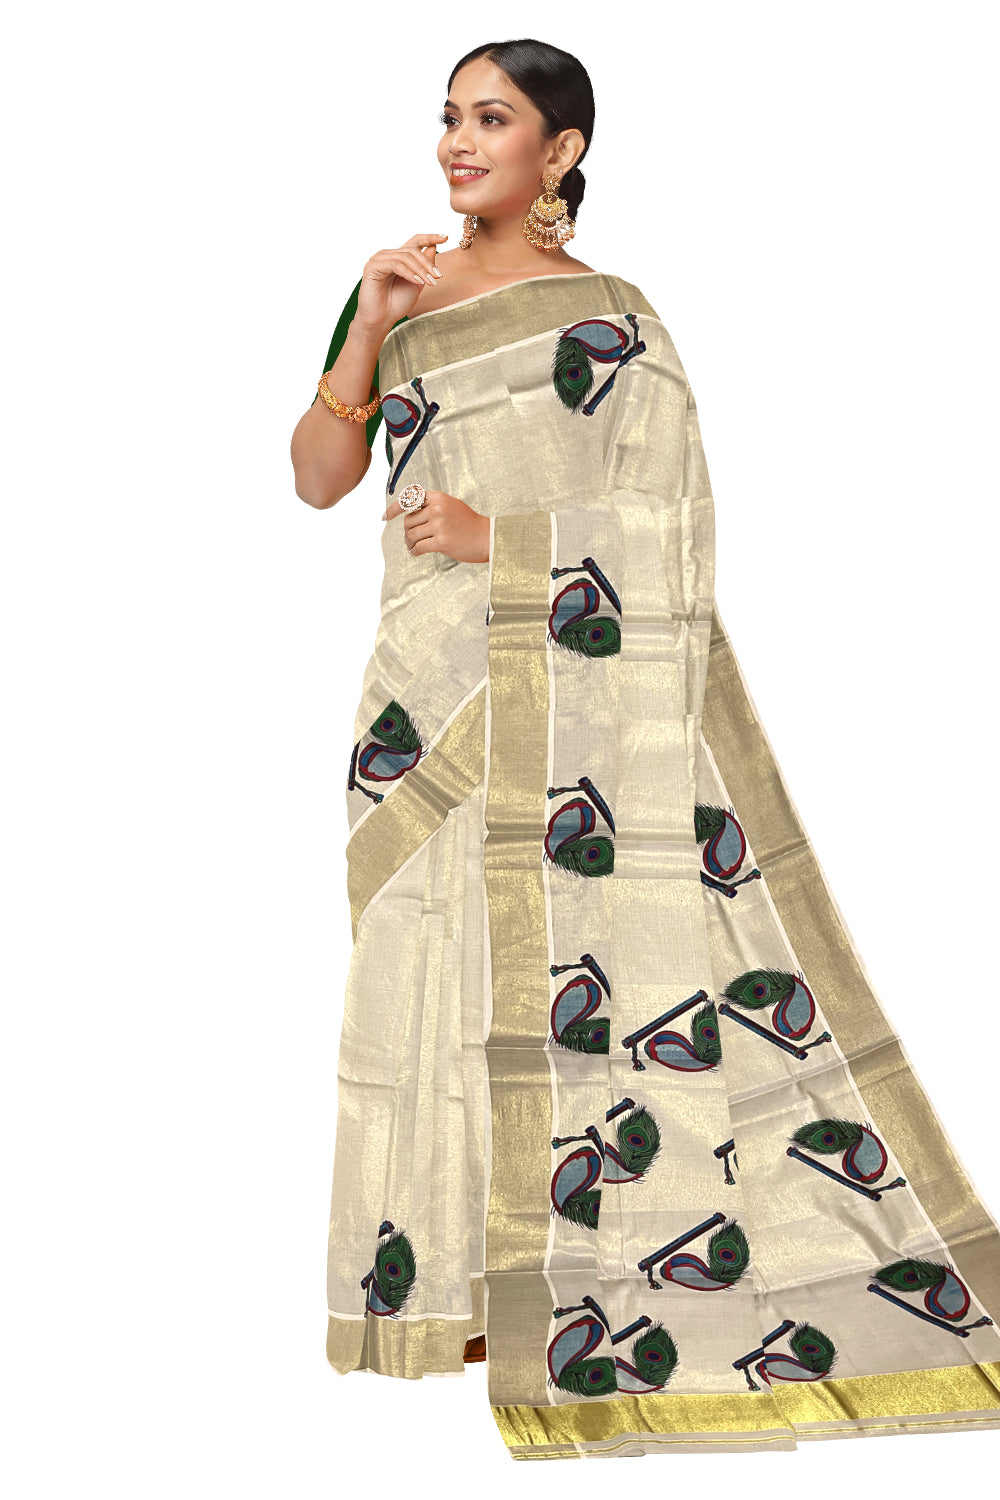 Kerala Tissue Kasavu Mural Printed Saree with Flute and Feather Design